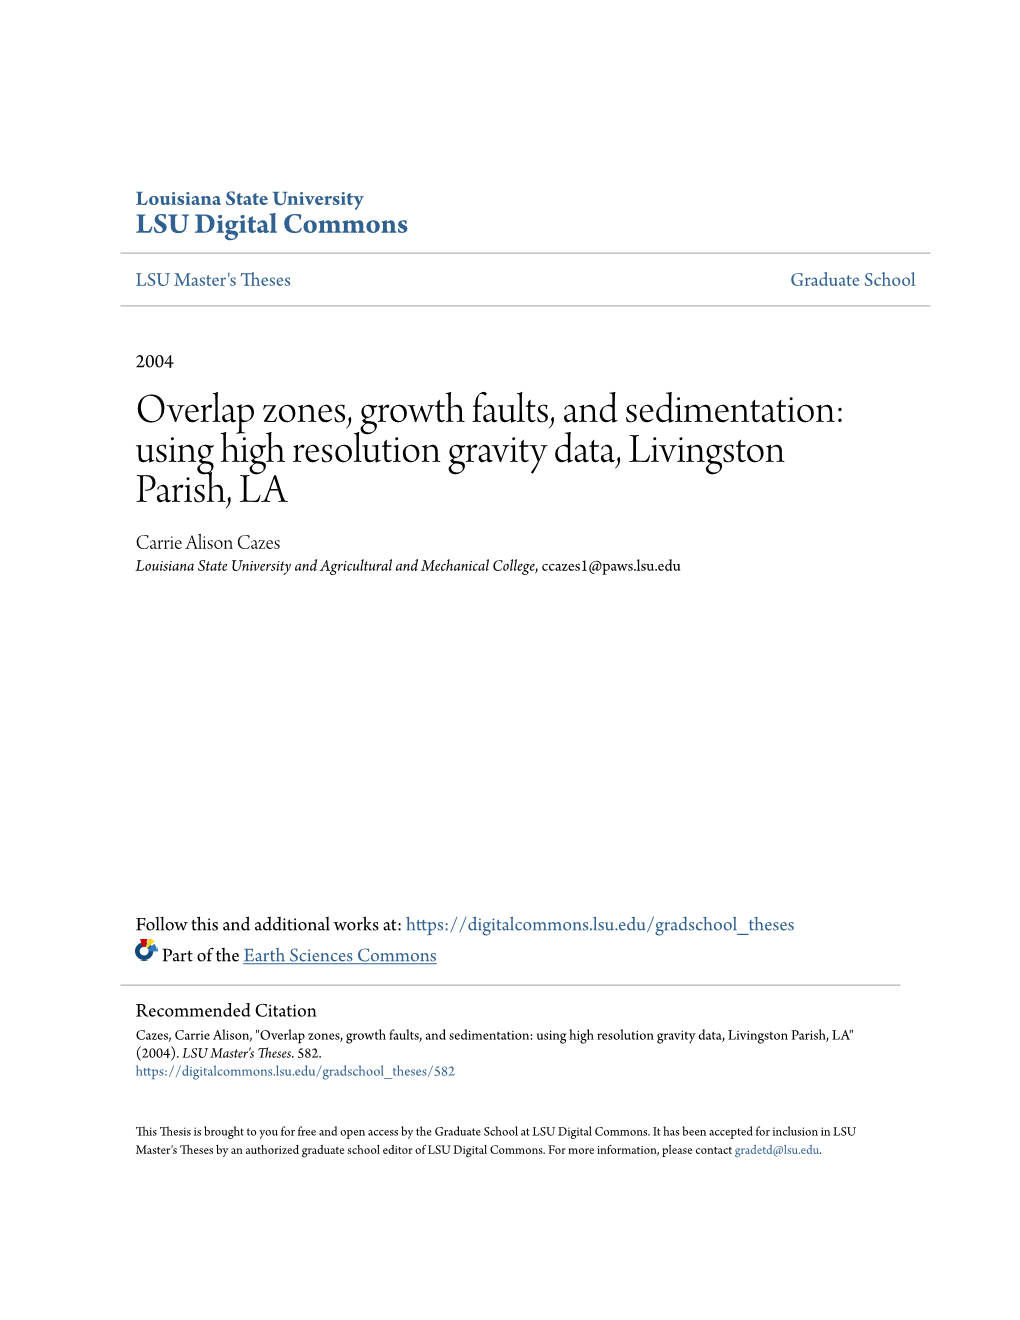 Overlap Zones, Growth Faults, and Sedimentation: Using High